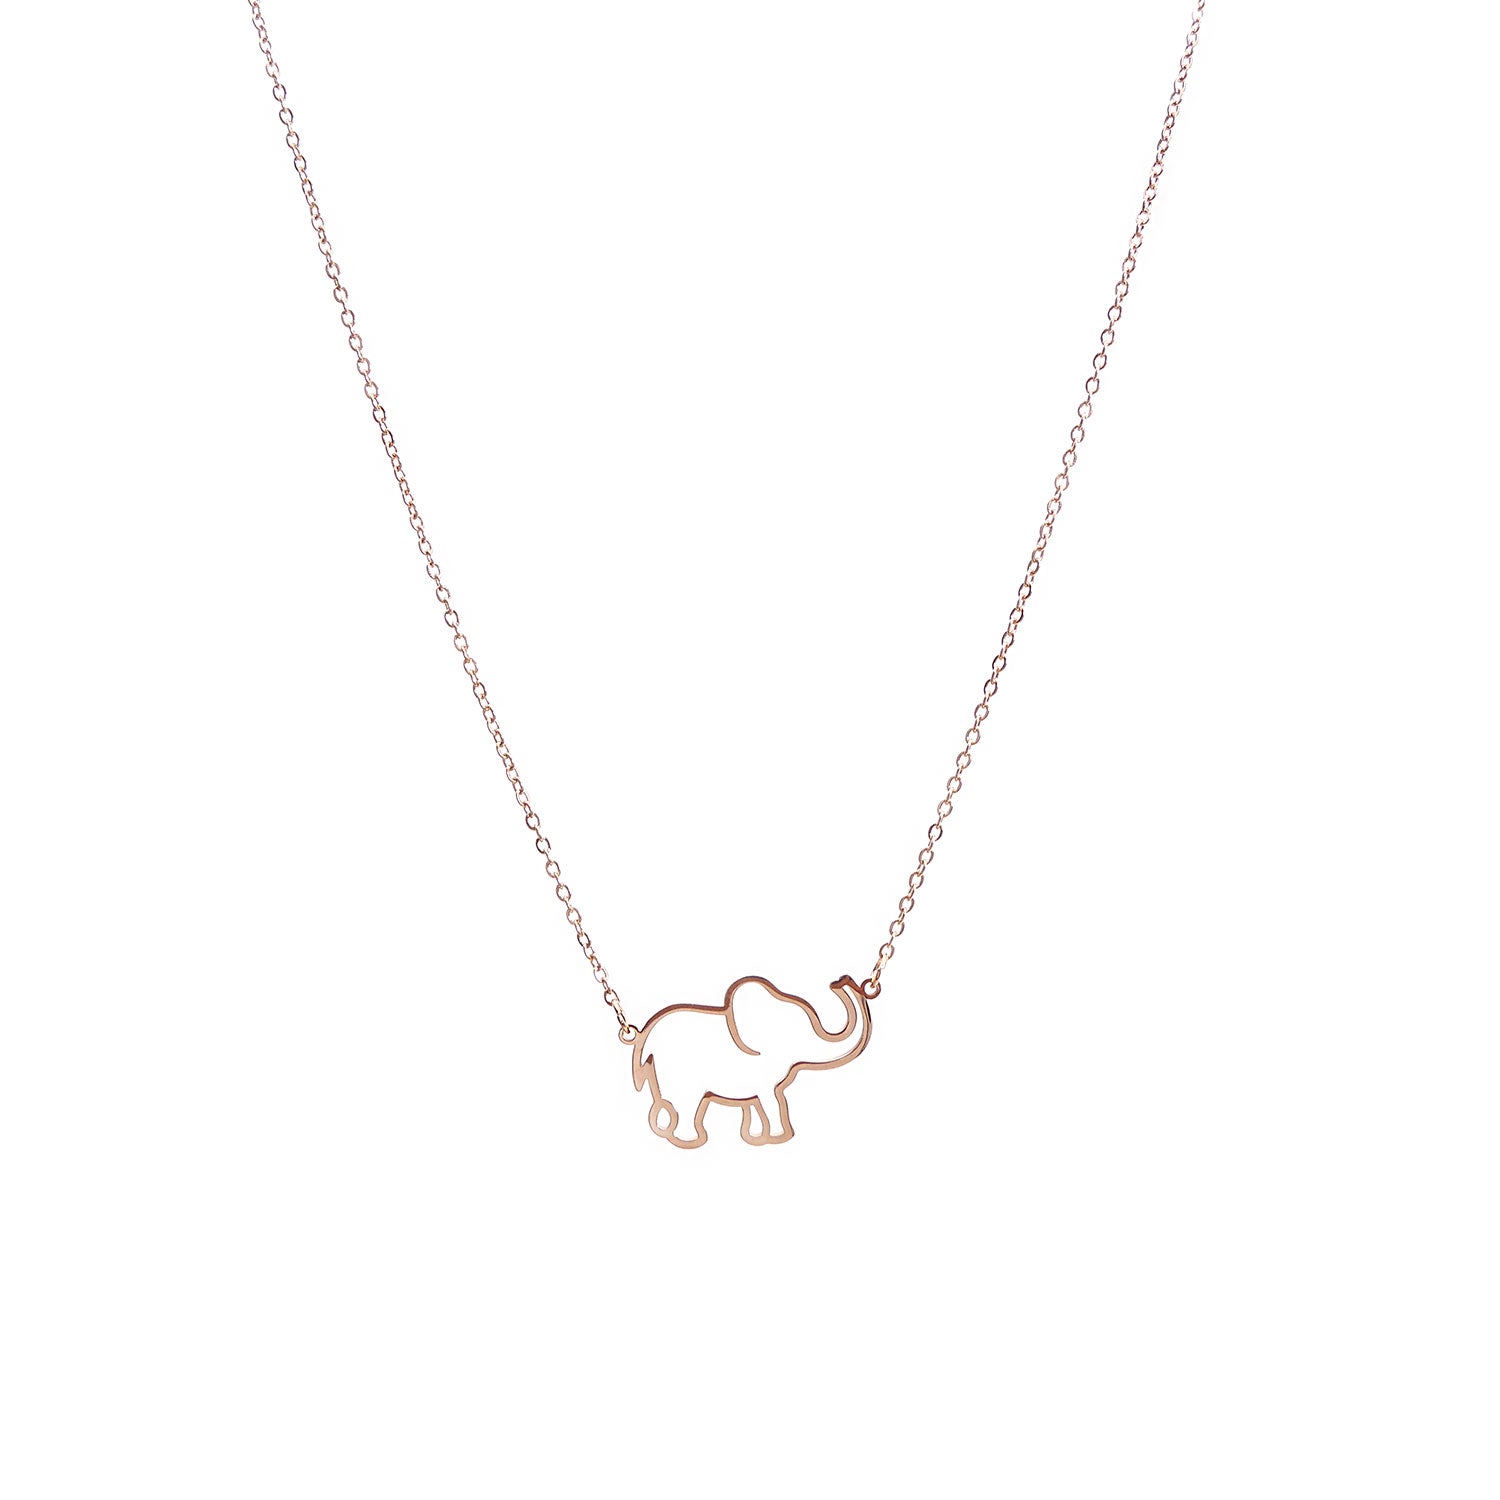 Majestic Elephant Necklace in Rose Gold